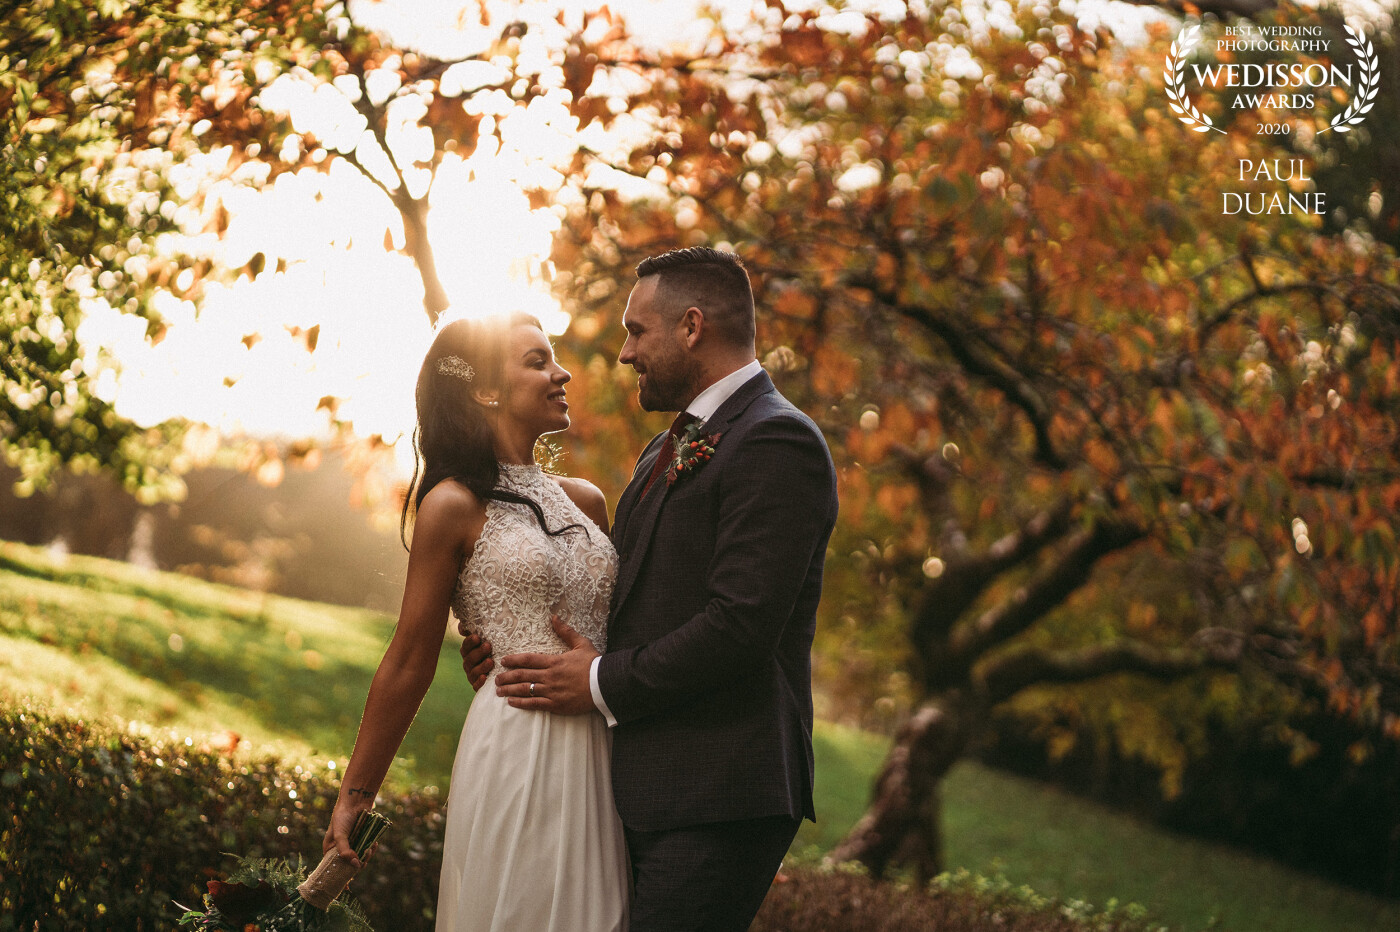 October weather in Ireland can be hit and miss but we were blessed with great weather for this lovely couple. I love the way the sun just shines through the trees, giving a real autumnal feel to the image. The photo was taken in Breaffy House Hotel, Co Mayo, Ireland